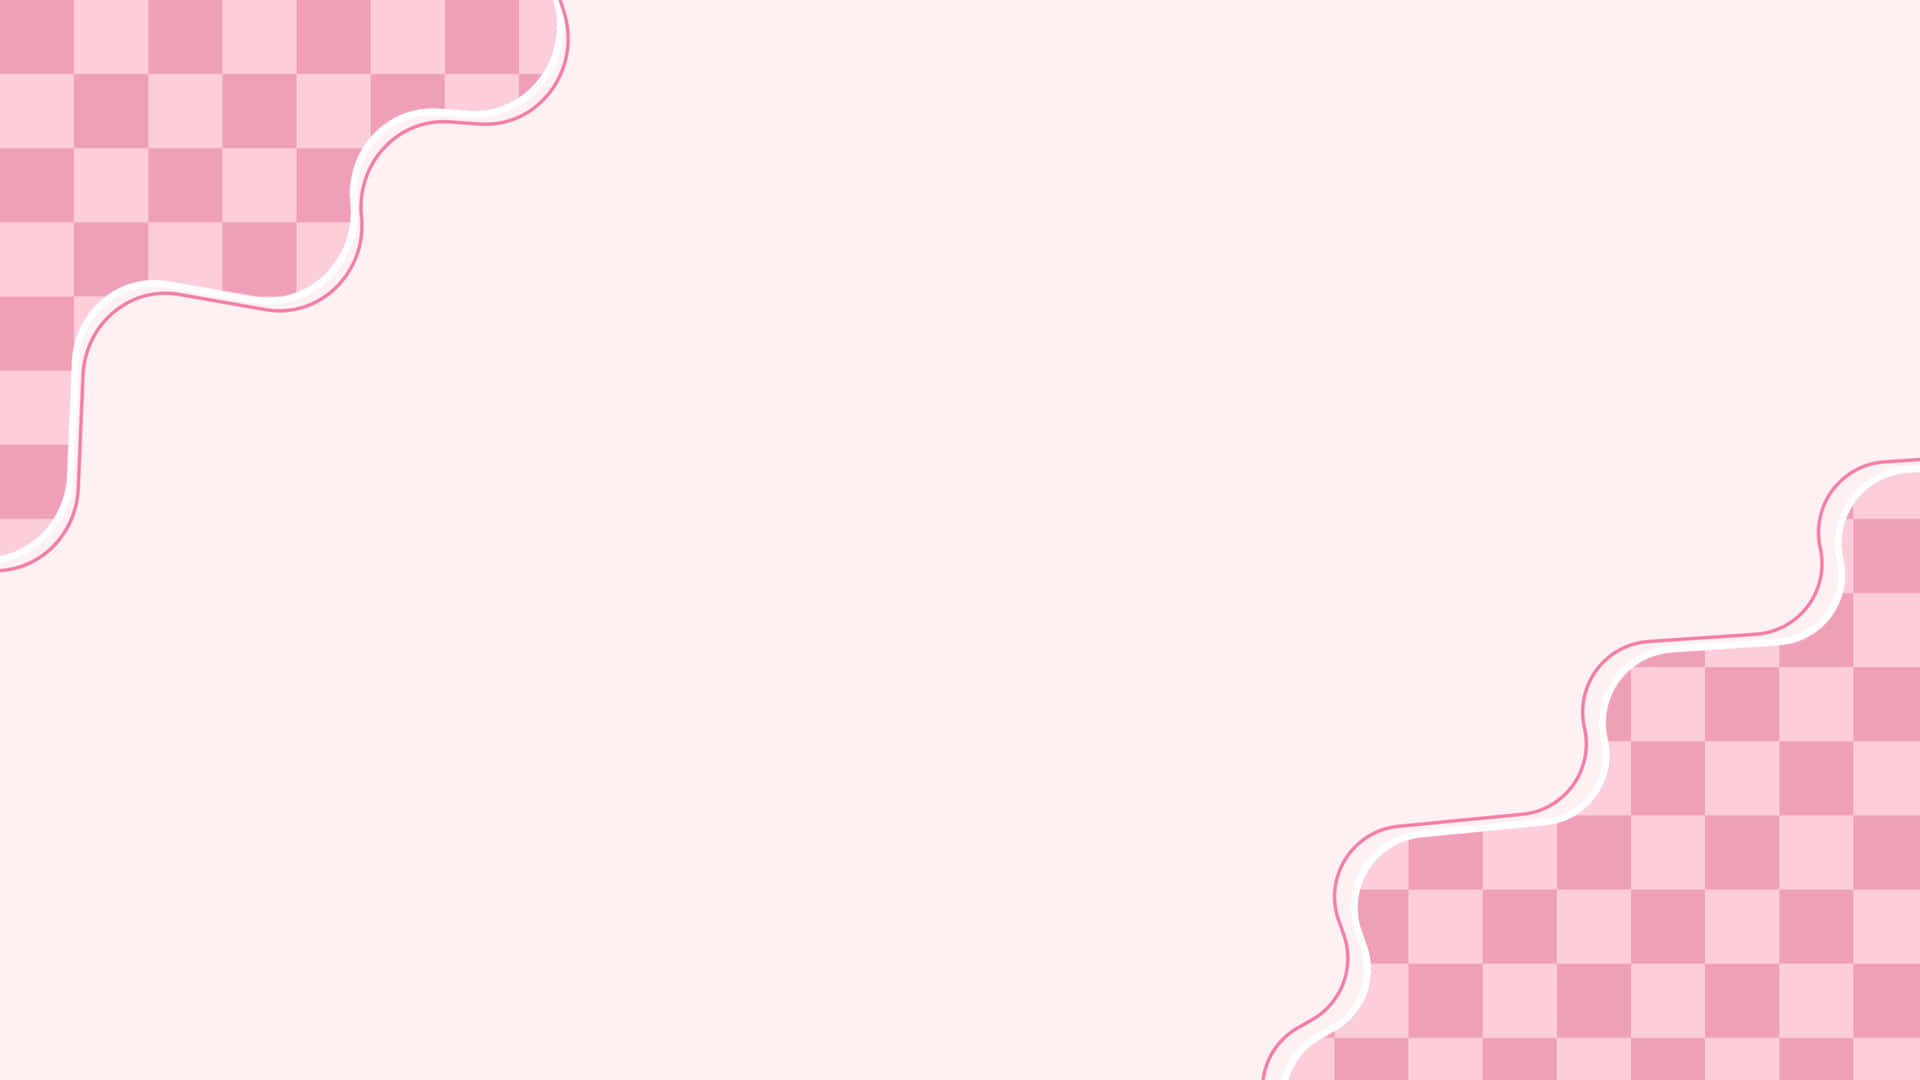 Get a burst of girly energy with this cute pink background!